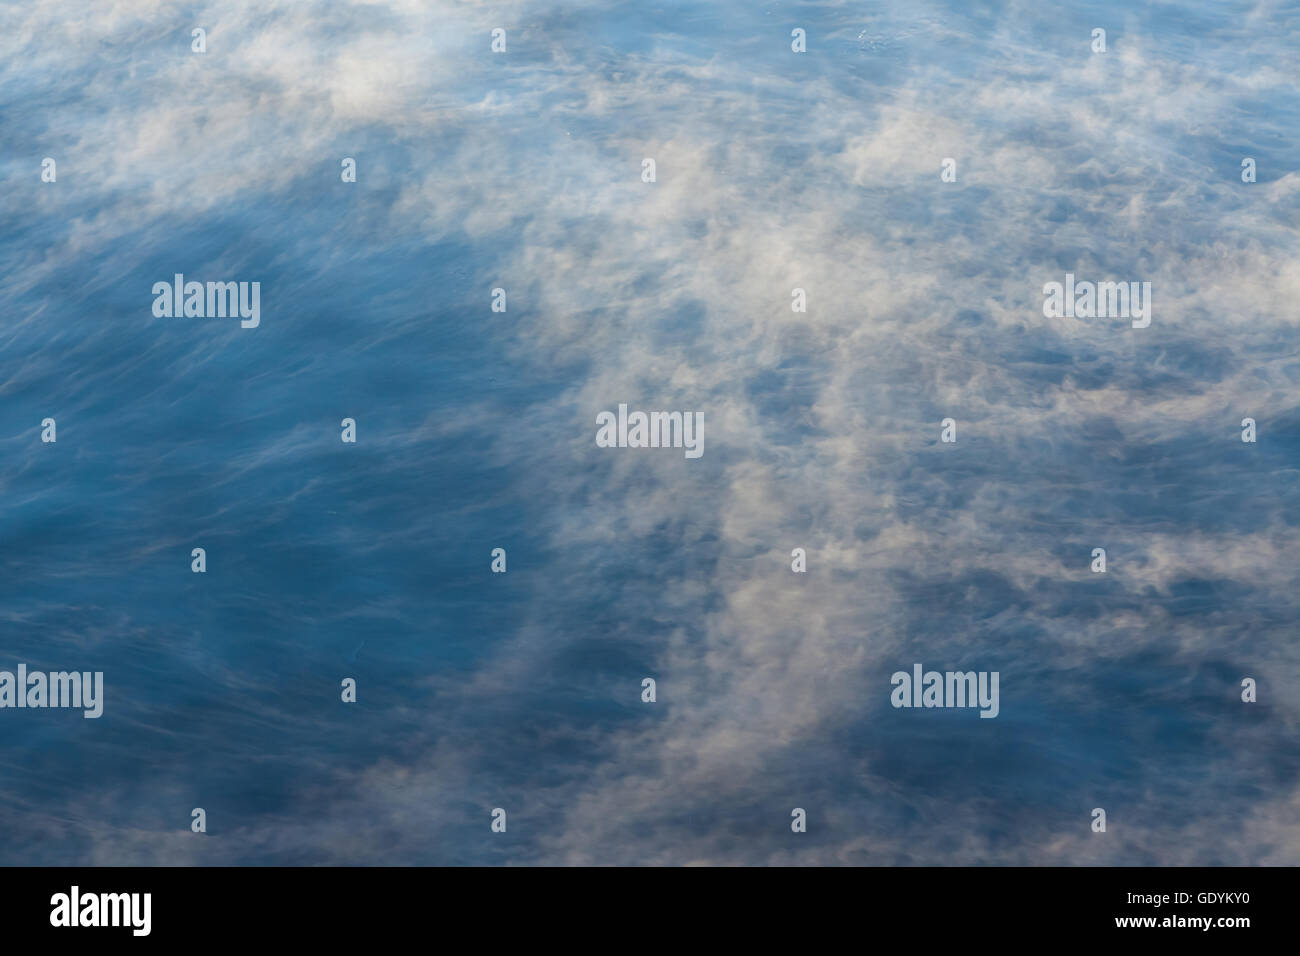 Water vapor on surface of cold icy water at sunny cold winter day Stock Photo